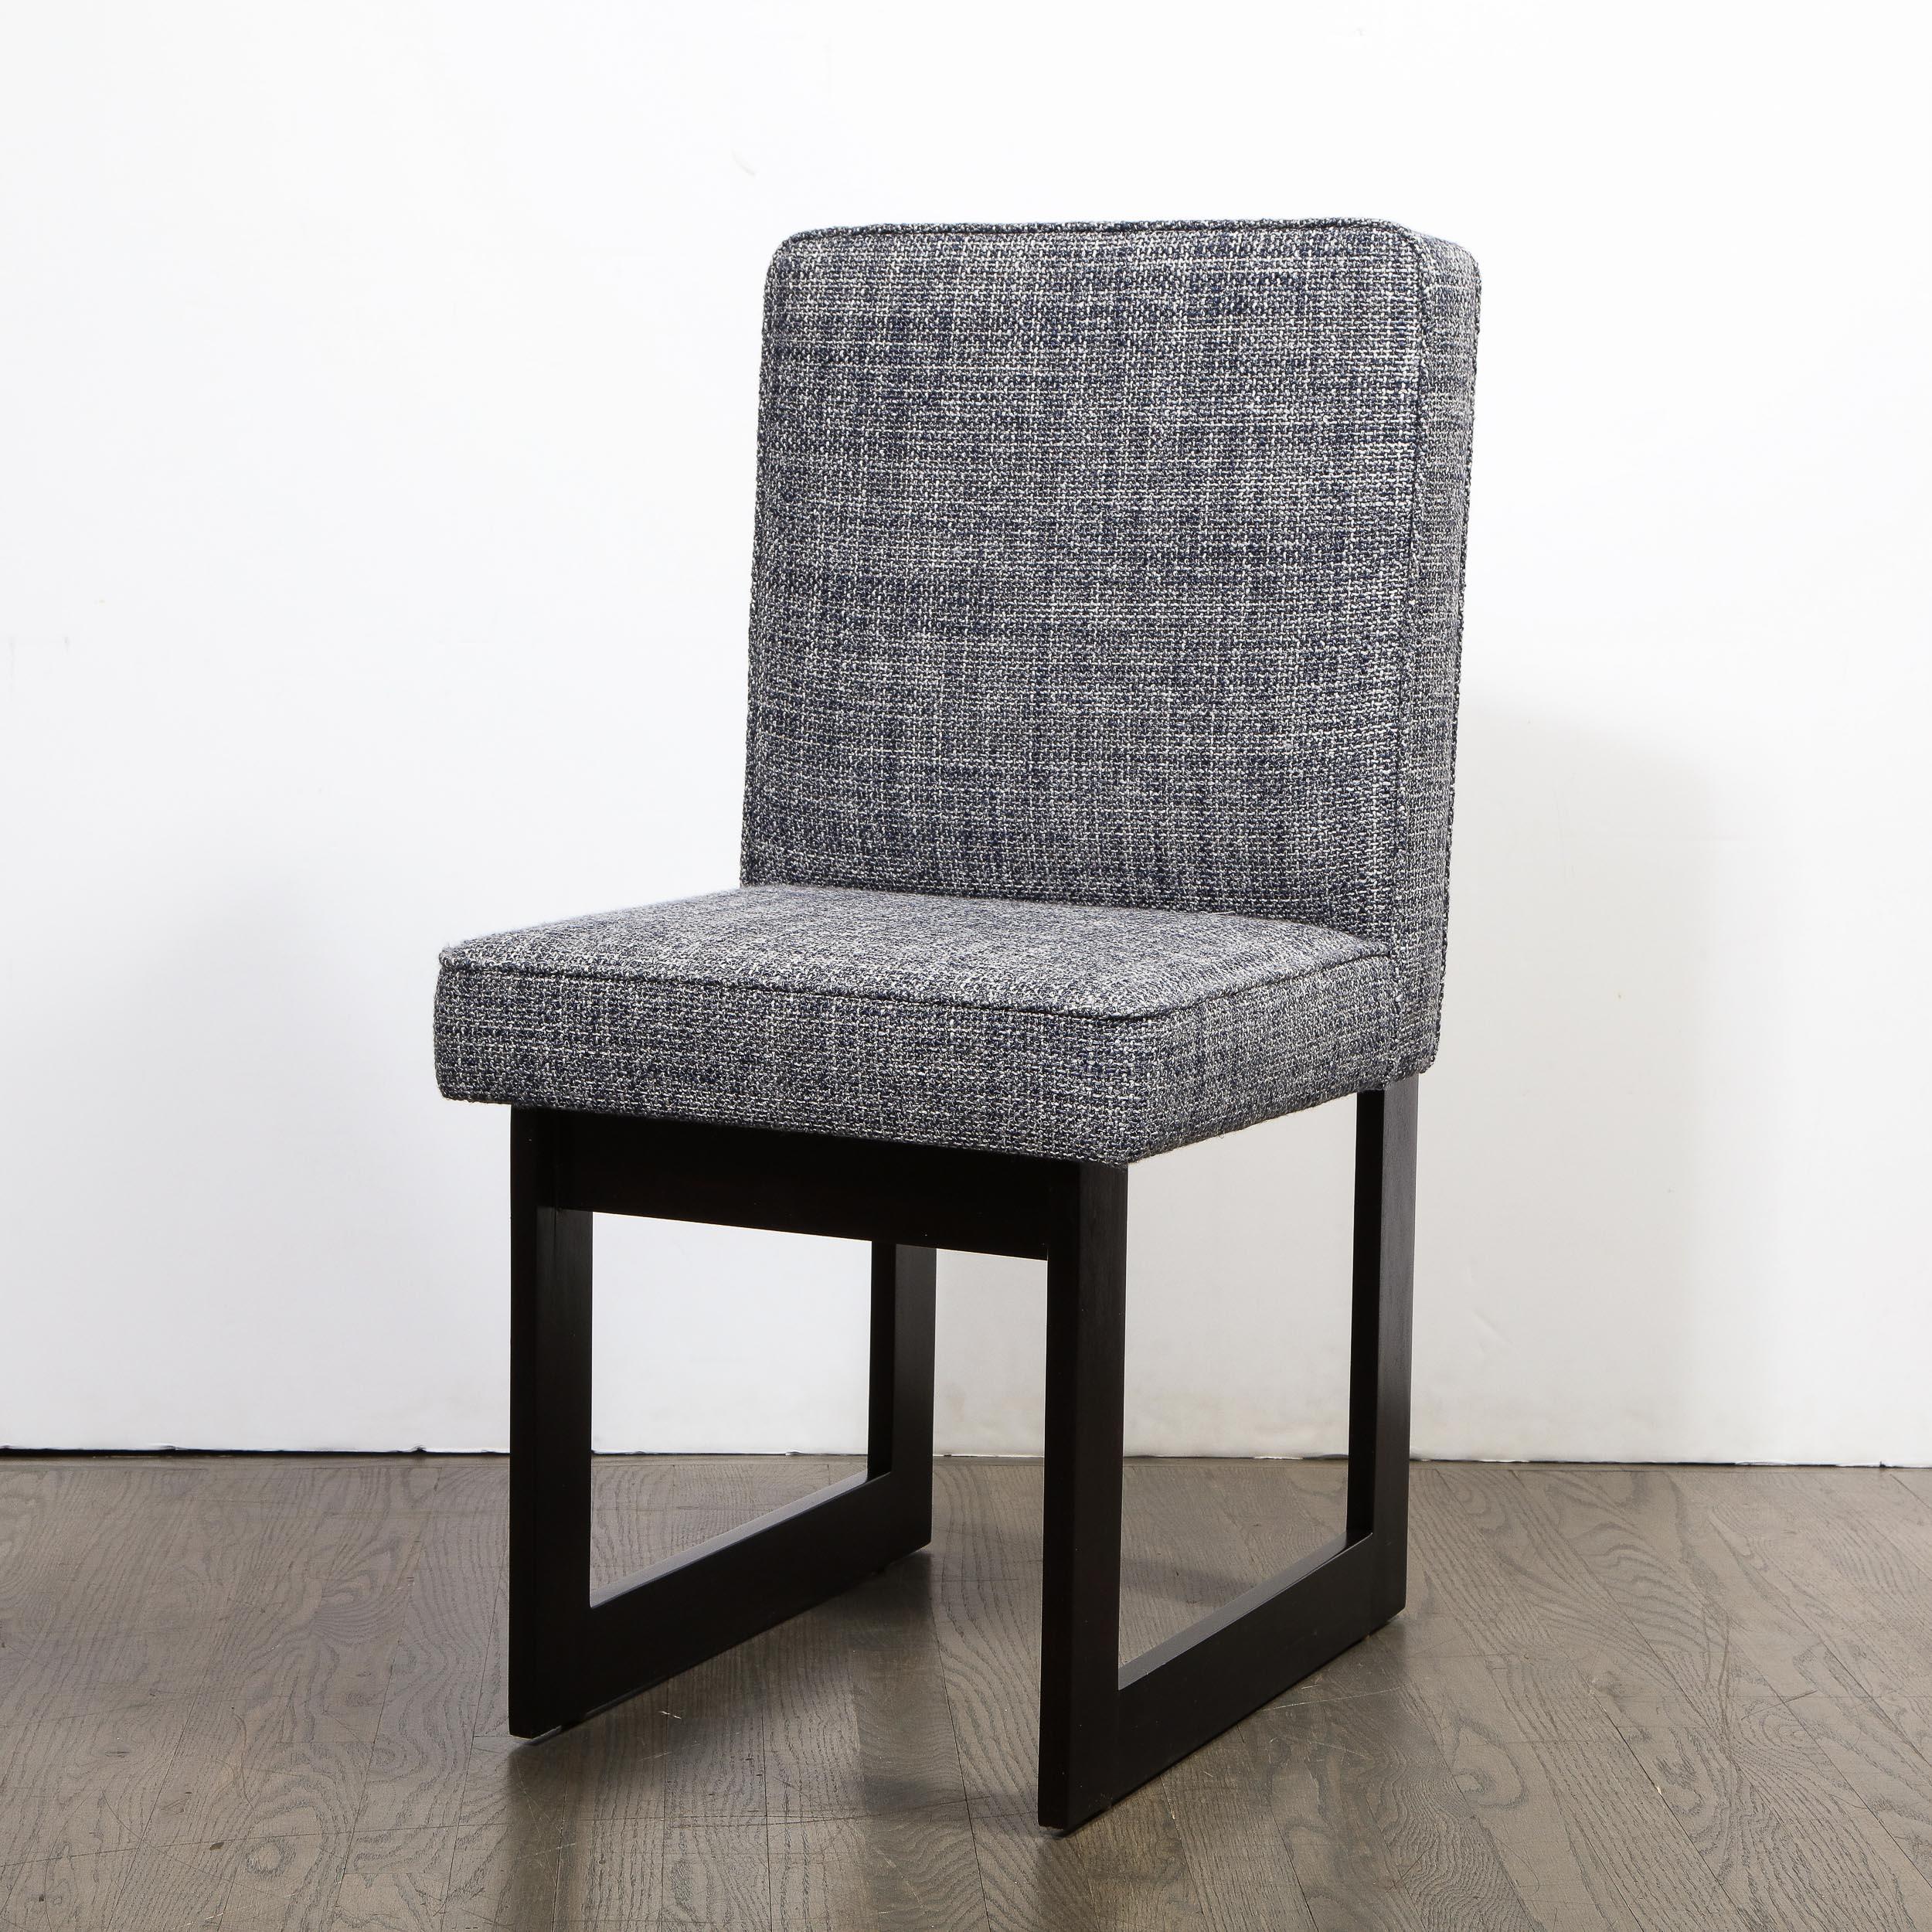 This refined modernist side chair offers a graphic open form geometric ebonized walnut frame in ebonized walnut. The ebonized sides of the chair appear as open squares, while the frame fastens to the back of the seat creating a rectangular form. The